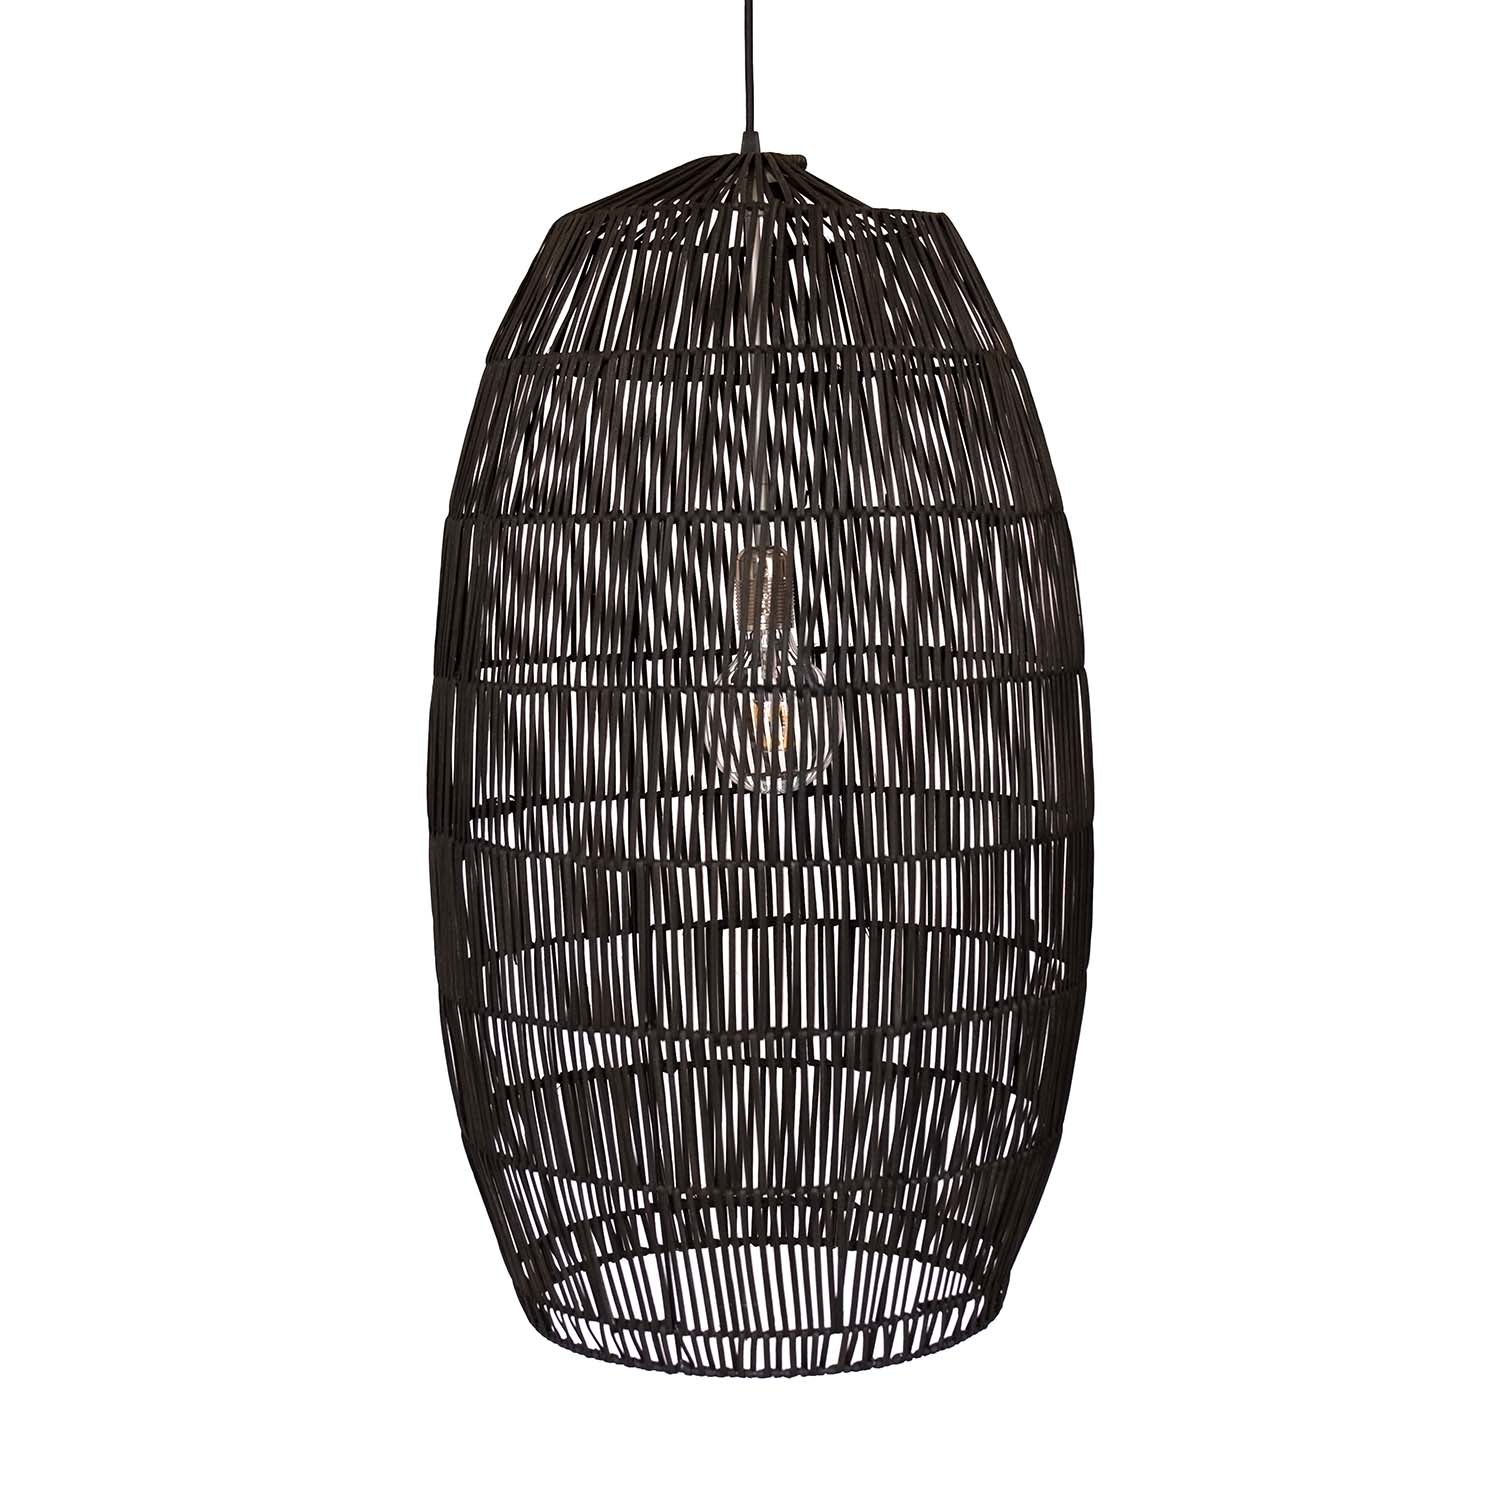 PICKLE SHORT - Round pendant light in natural or exotic black rattan